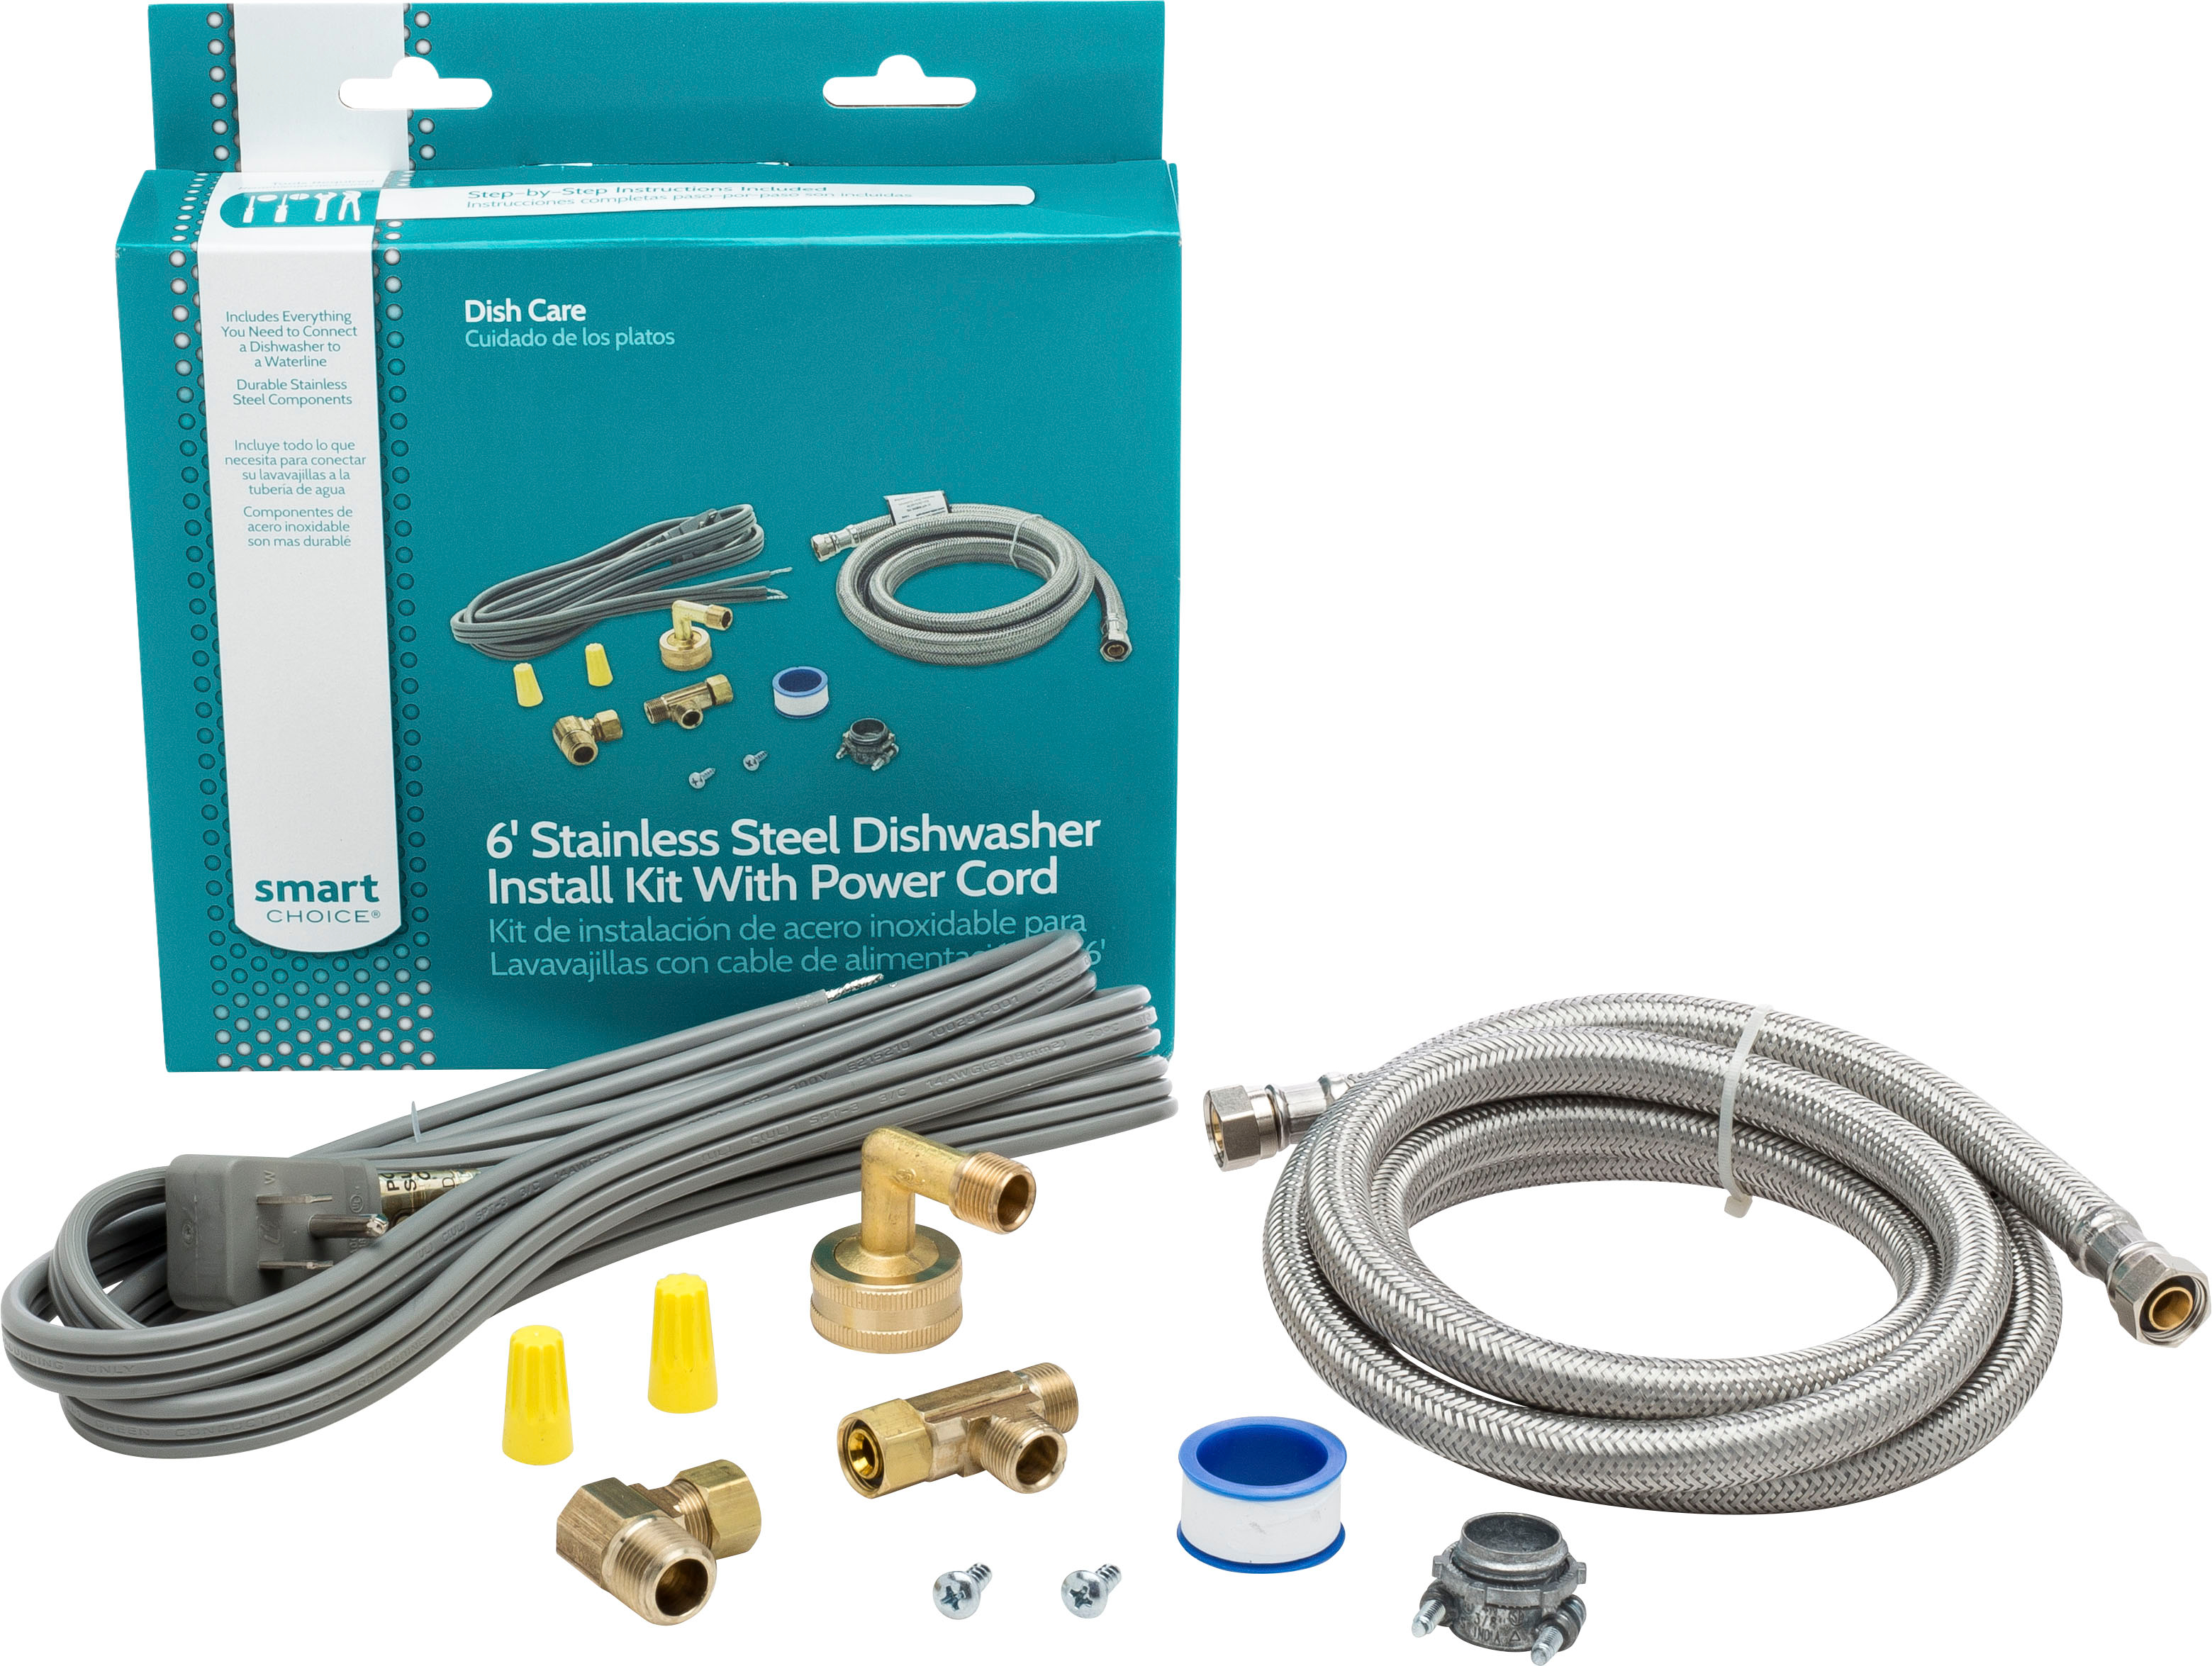 New Smart Choice 6' Stainless Steel Dishwasher Install Kit w/ Power Cord 